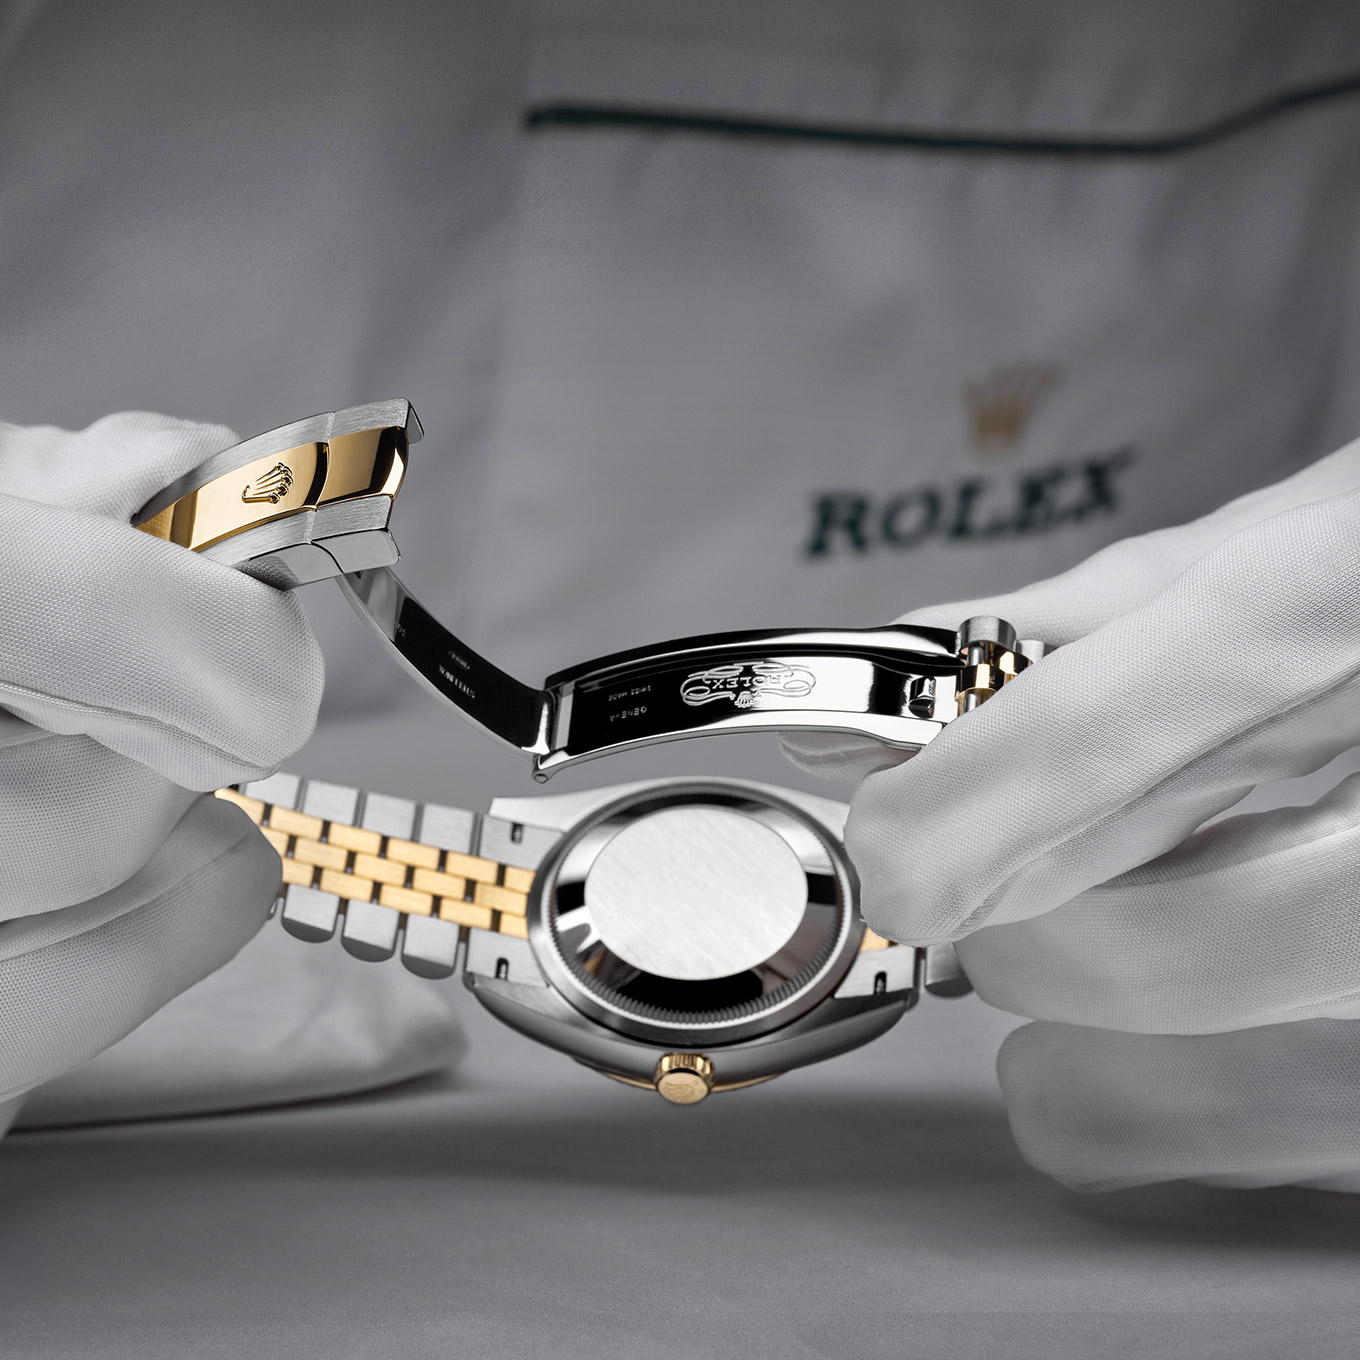 Rolex servicing at Radcliffe Jewelers in Pikesville & Towson, MD